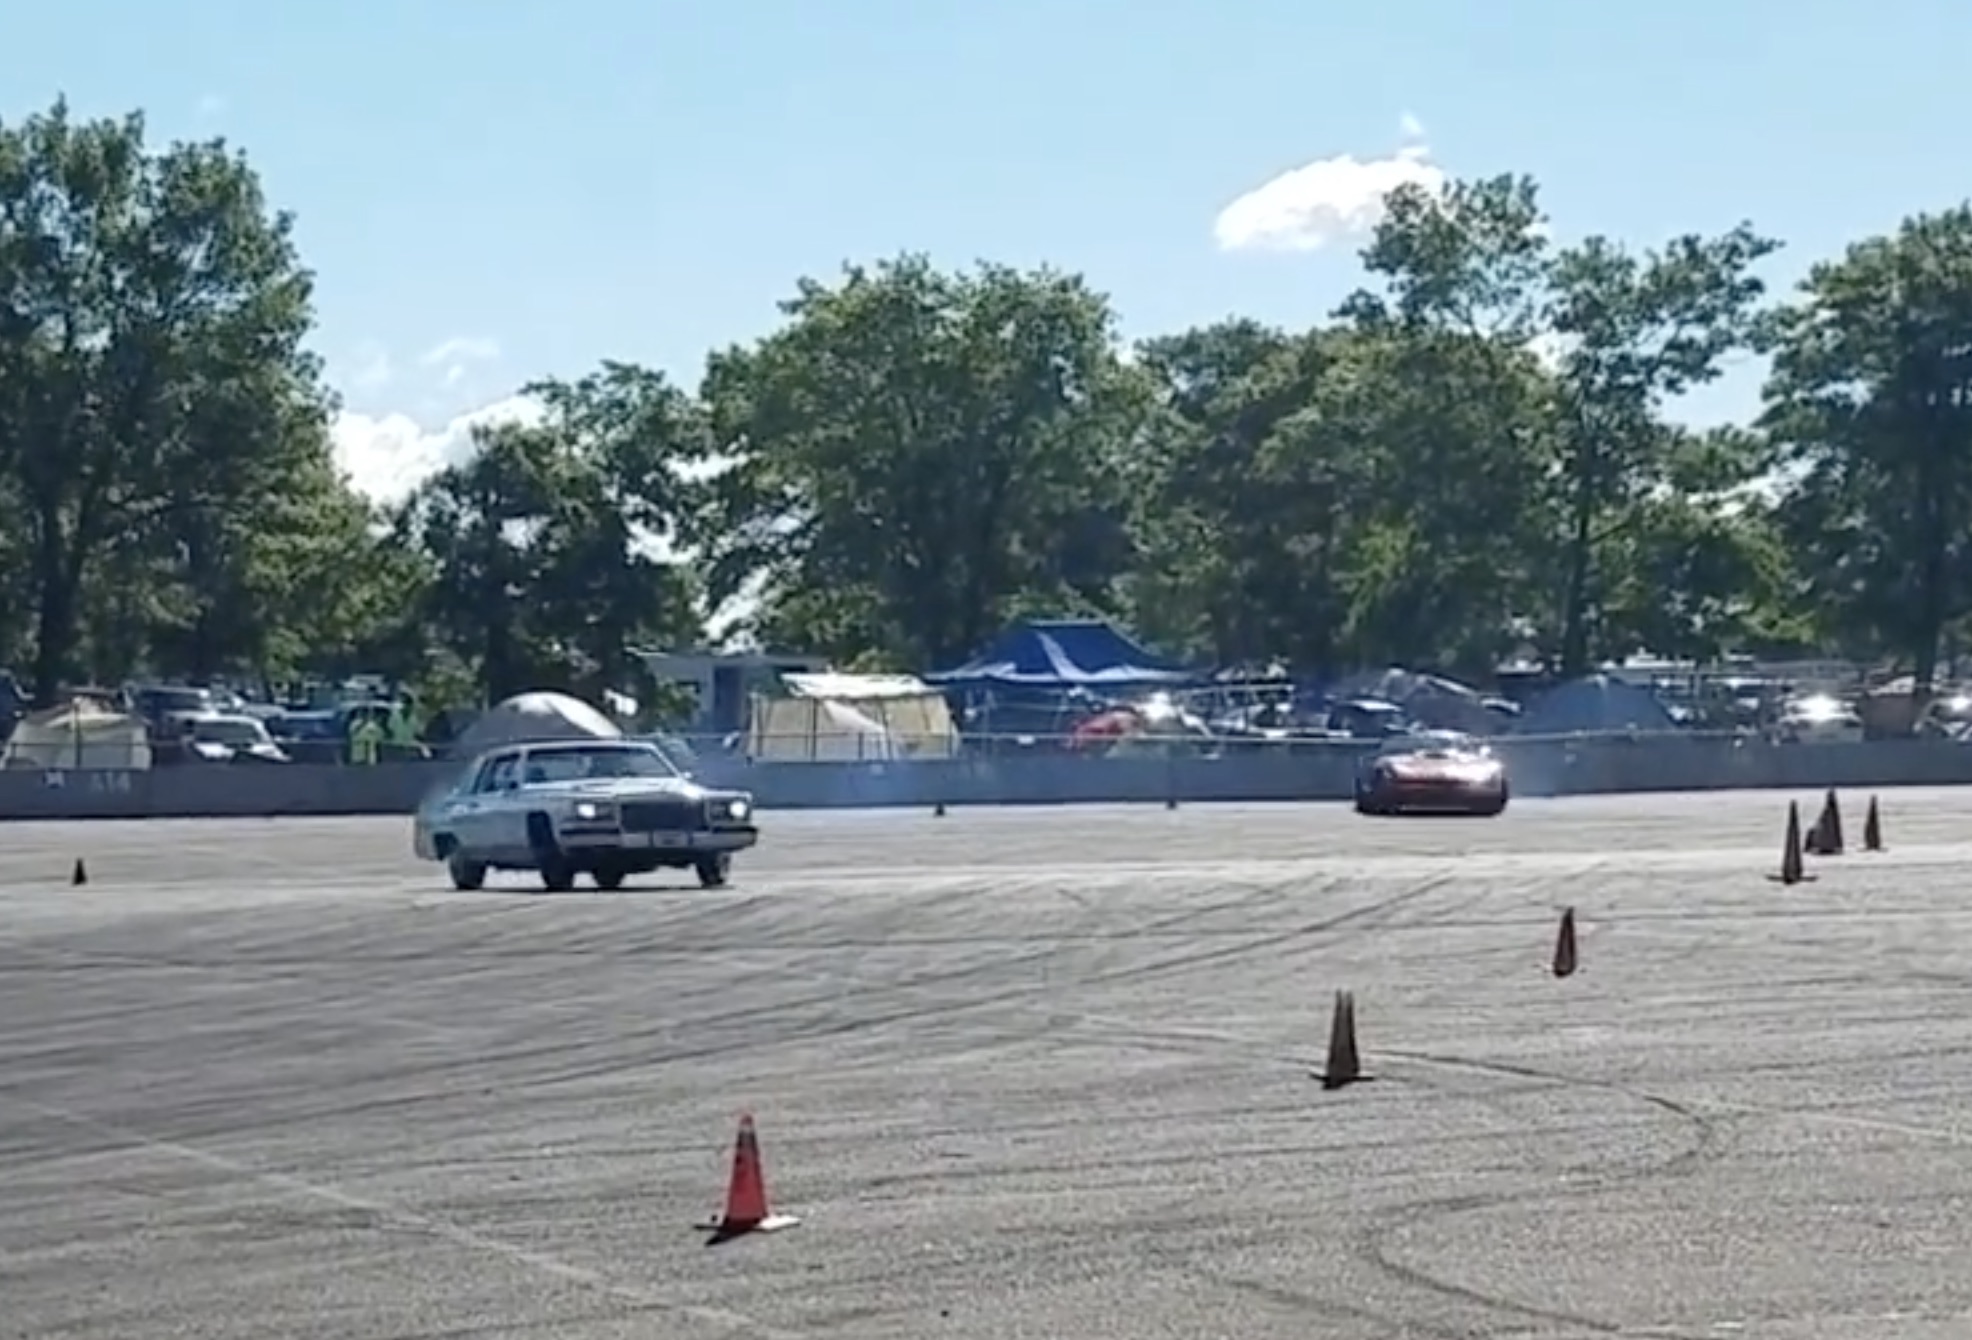 The 1980s, Summed Up In One Tandem Drift – C4 Corvette Versus A Big-Boy Cadillac!